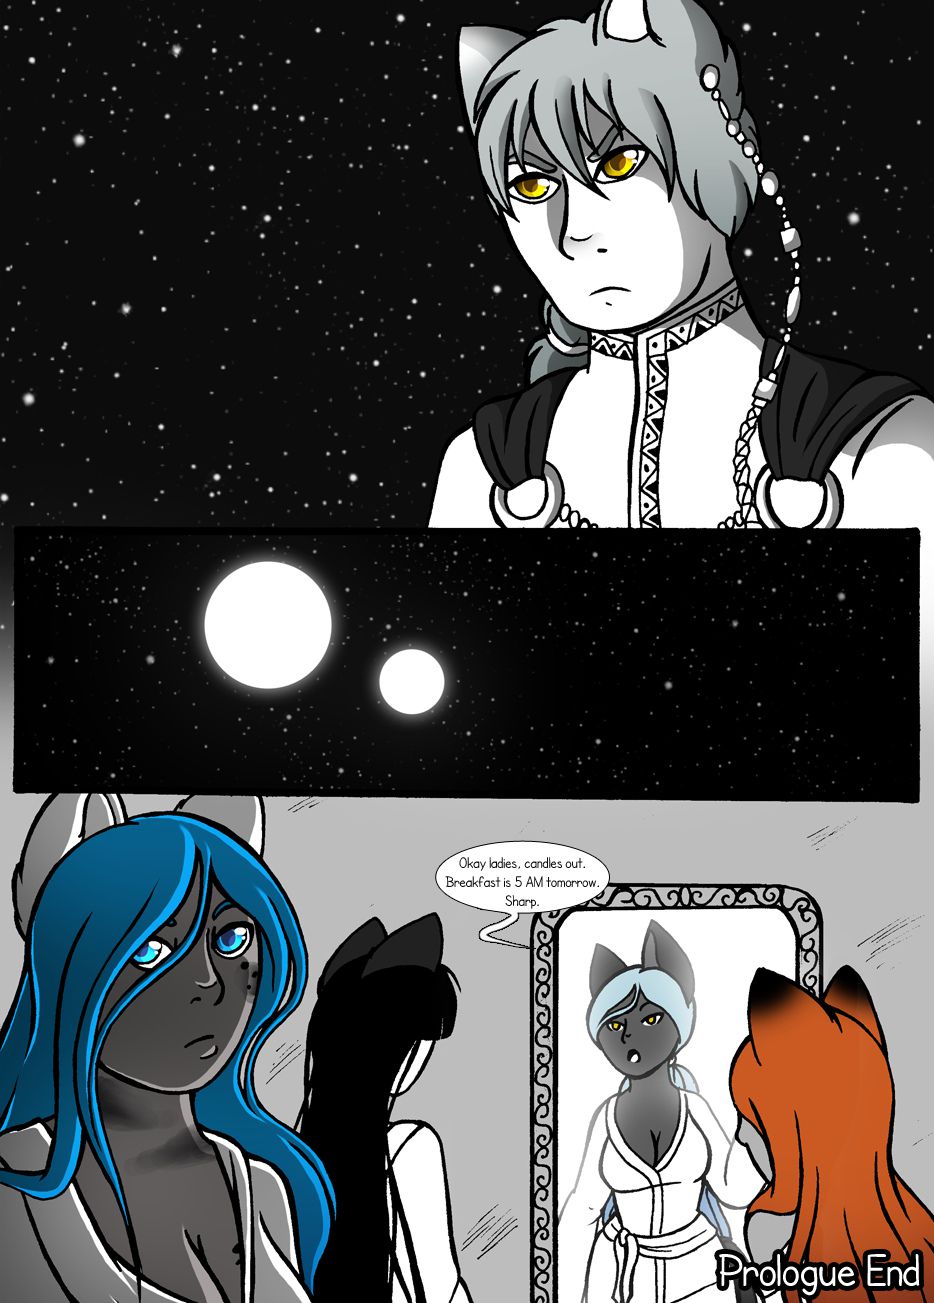 [Jeny-jen94]Between Kings and Queens[ongoing] 15